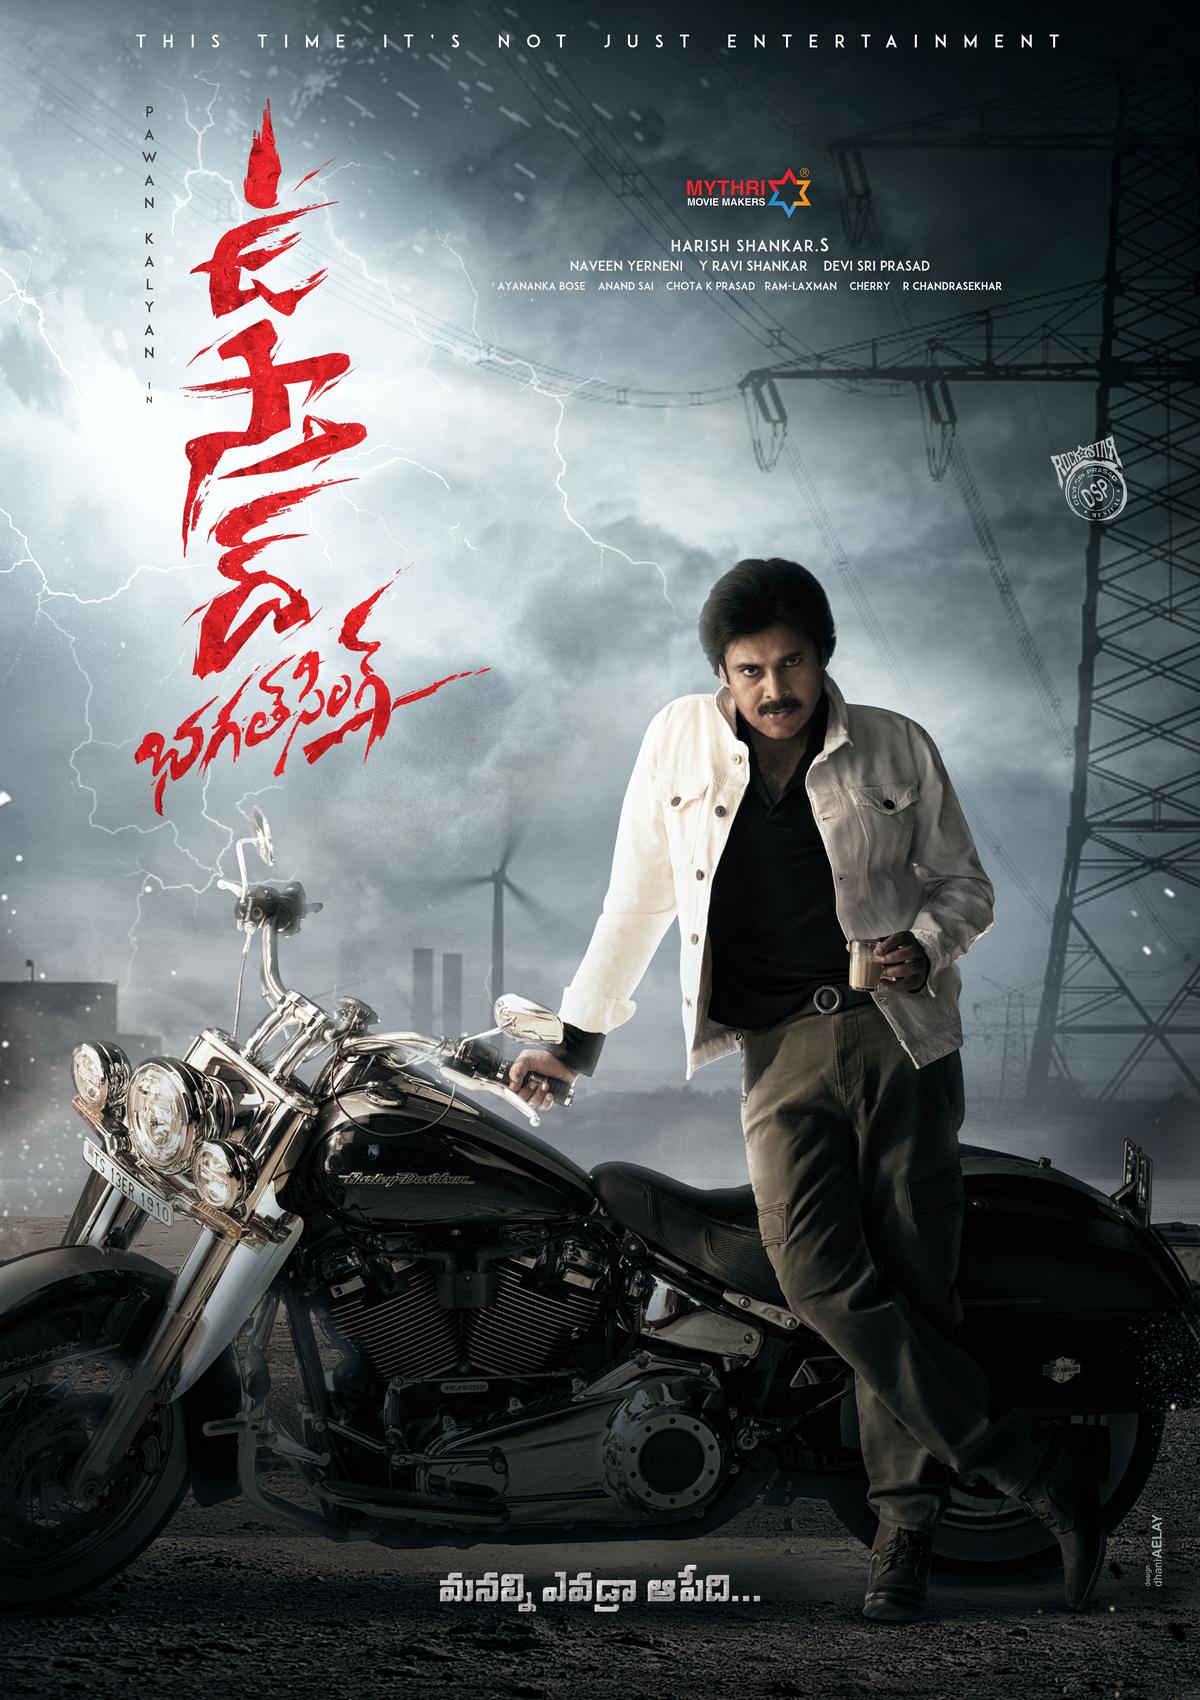 The poster of ‘Ustaad Bhagat Singh’ featuring Pawan Kalyan